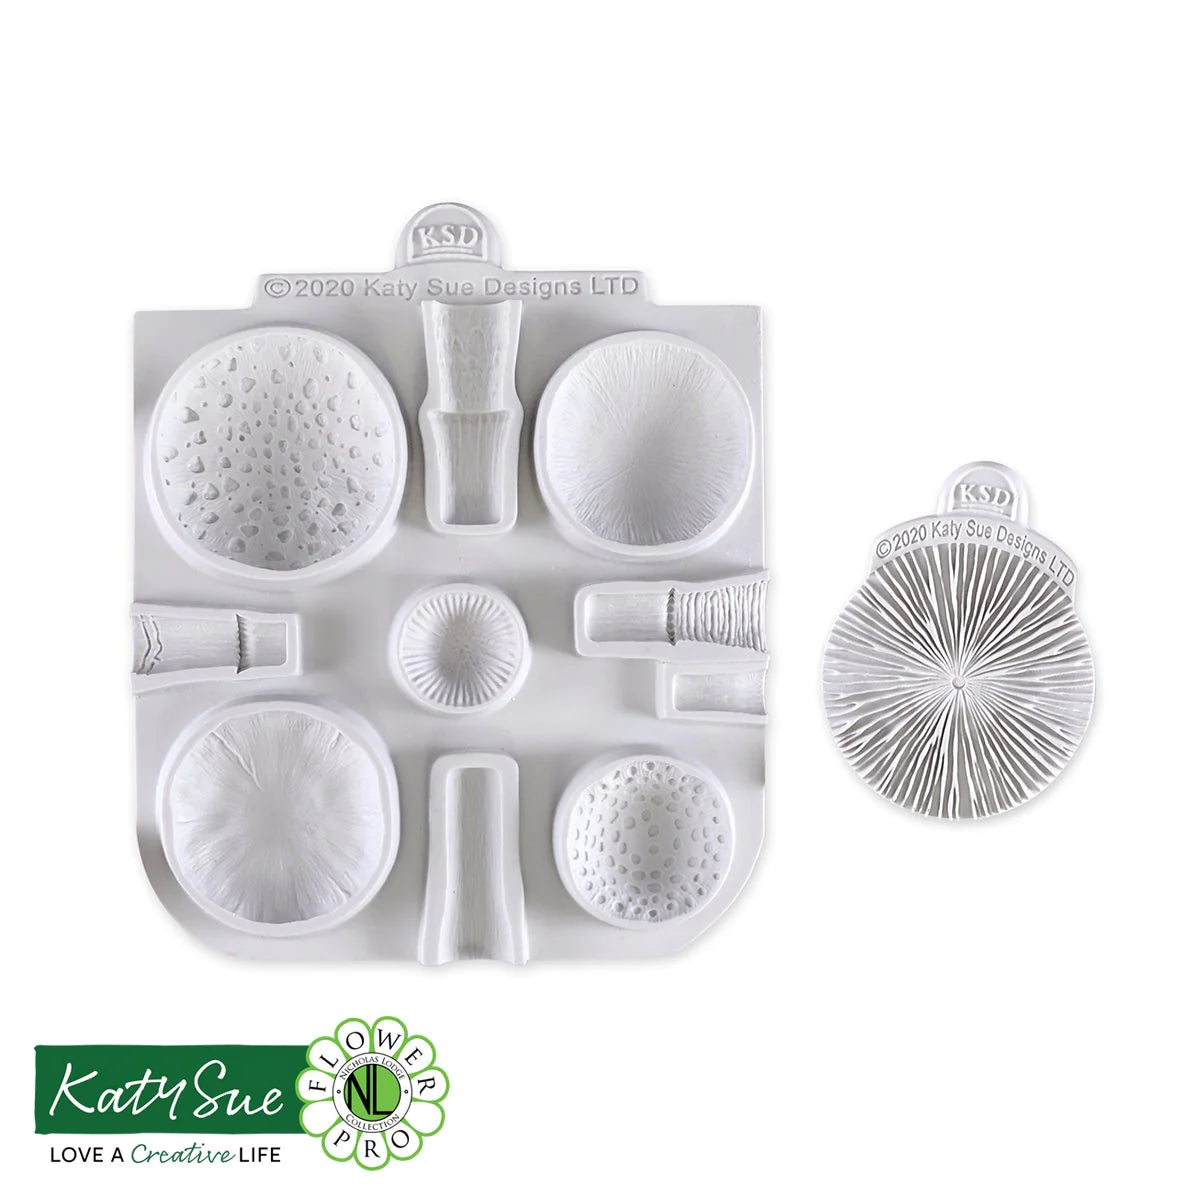 GOWA Large Button Mushroom Silicone Mold by WSA